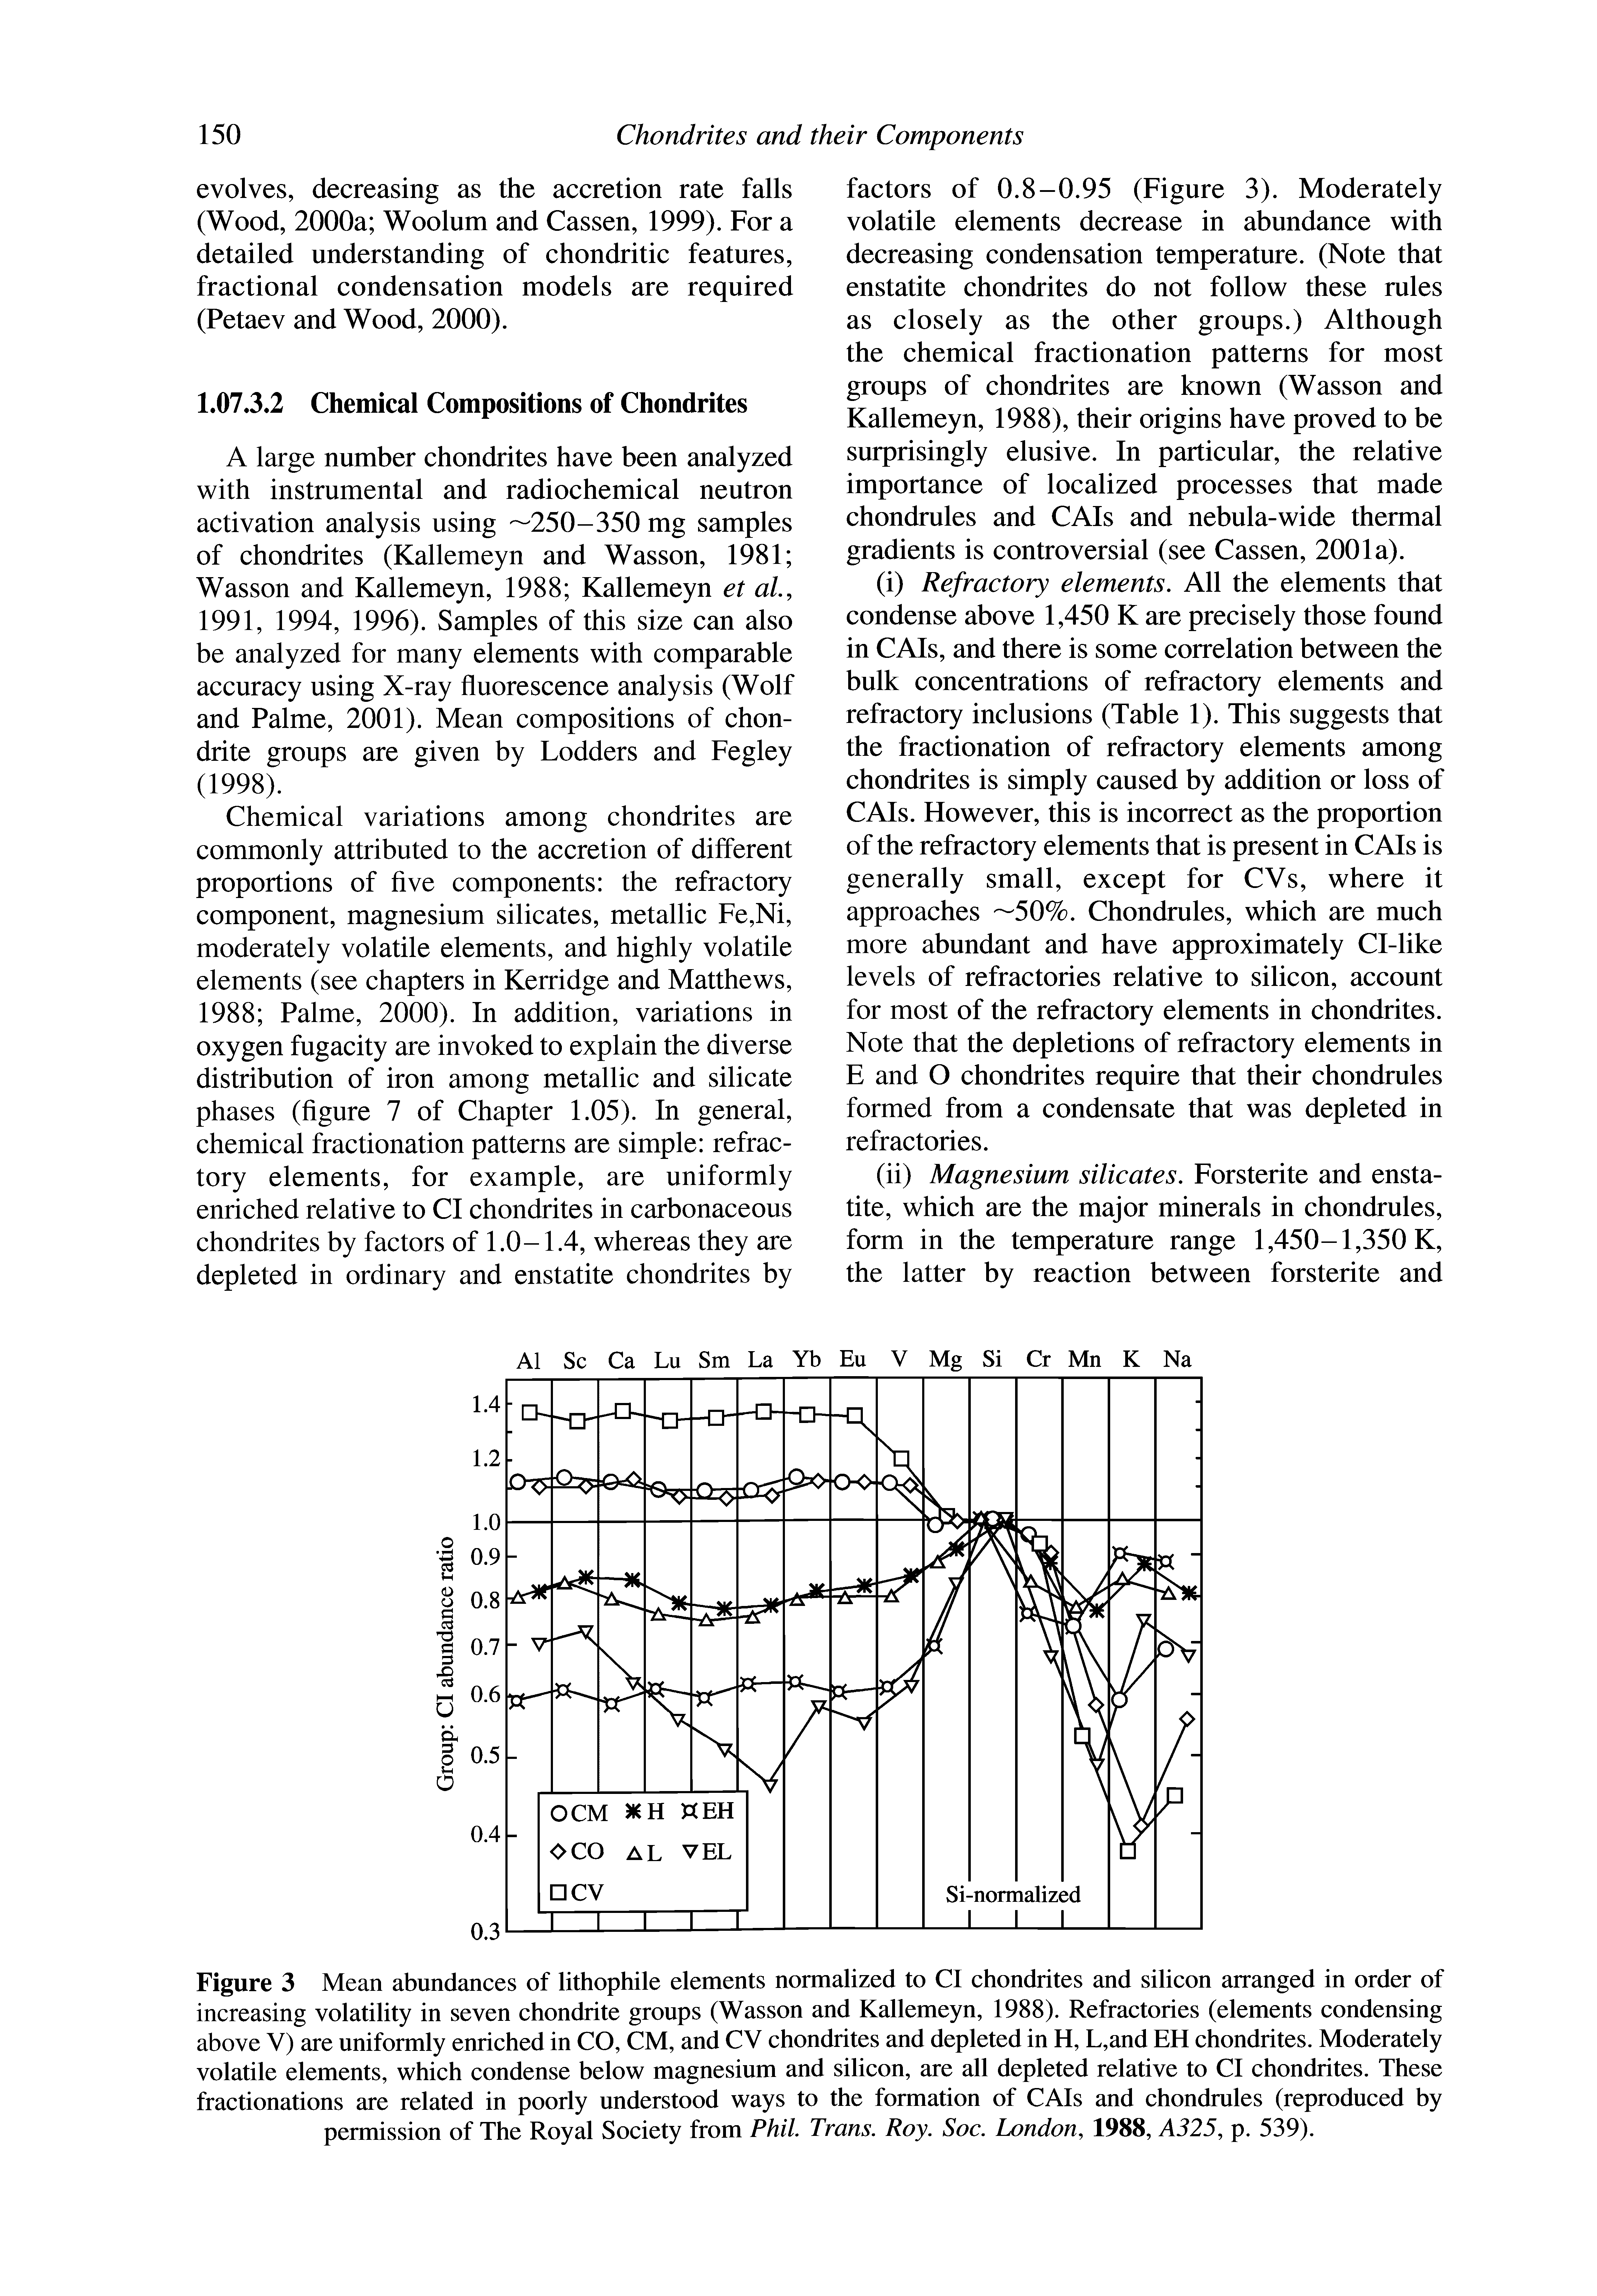 Figure 3 Mean abundances of lithophile elements normalized to Cl chondrites and silicon arranged in order of increasing volatility in seven chondrite groups (Wasson and Kallemeyn, 1988). Refractories (elements condensing above V) are uniformly enriched in CO, CM, and CV chondrites and depleted in H, L,and EH chondrites. Moderately volatile elements, which condense below magnesium and silicon, are all depleted relative to Cl chondrites. These fractionations are related in poorly understood ways to the formation of CAIs and chondrules (reproduced by permission of The Royal Society from Phil. Trans. Roy. Soc. London, 1988, A325, p. 539).